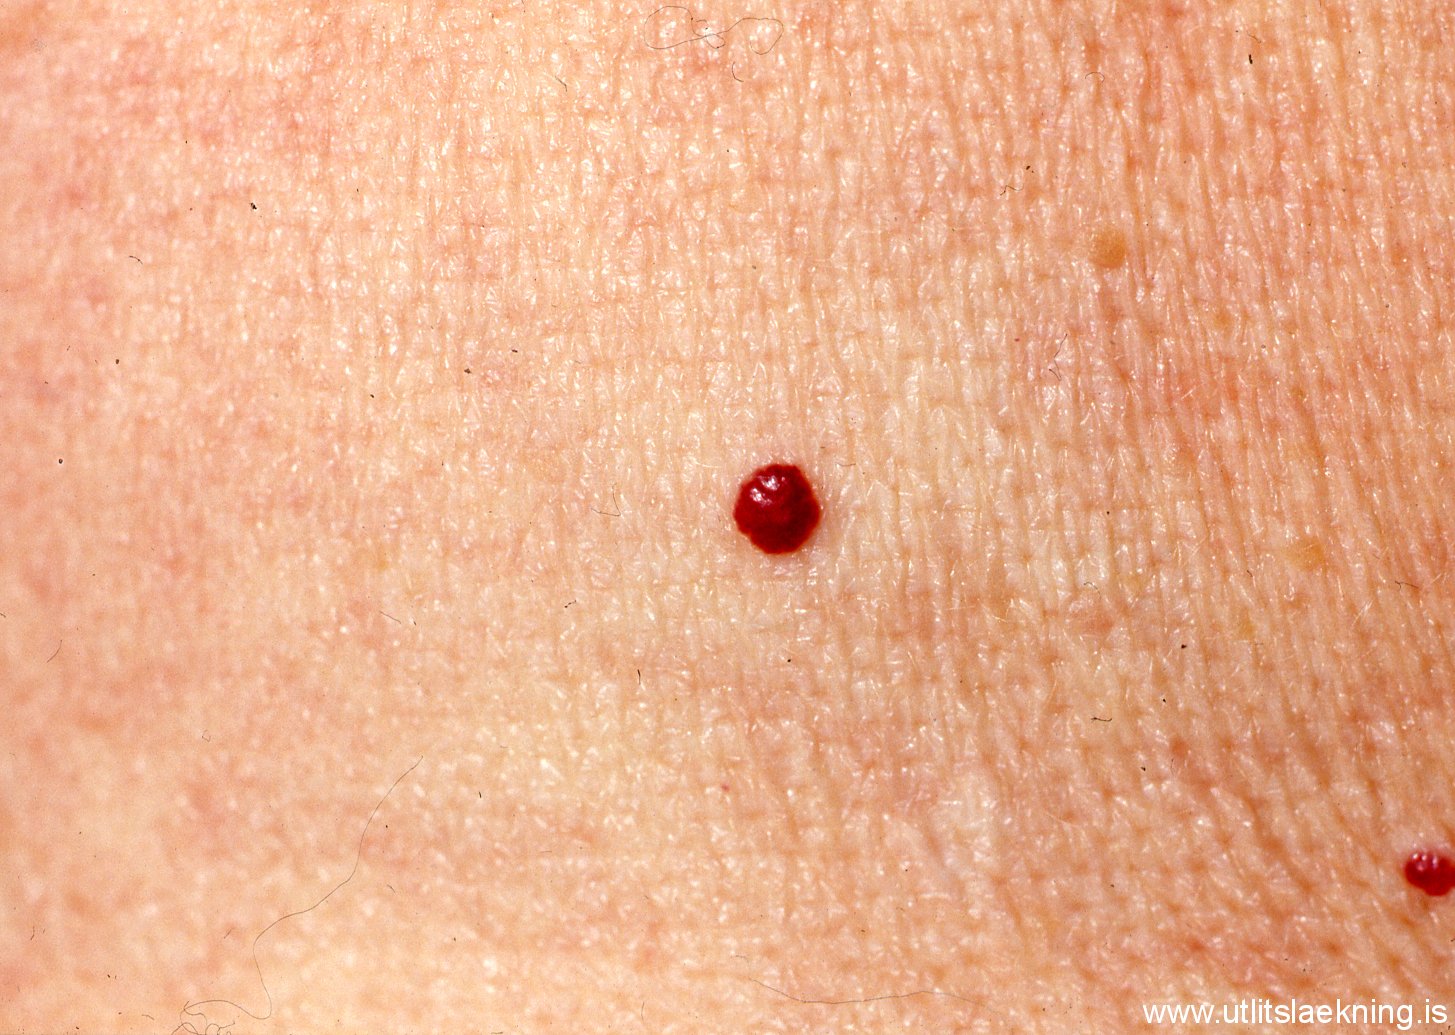 angioma pictures